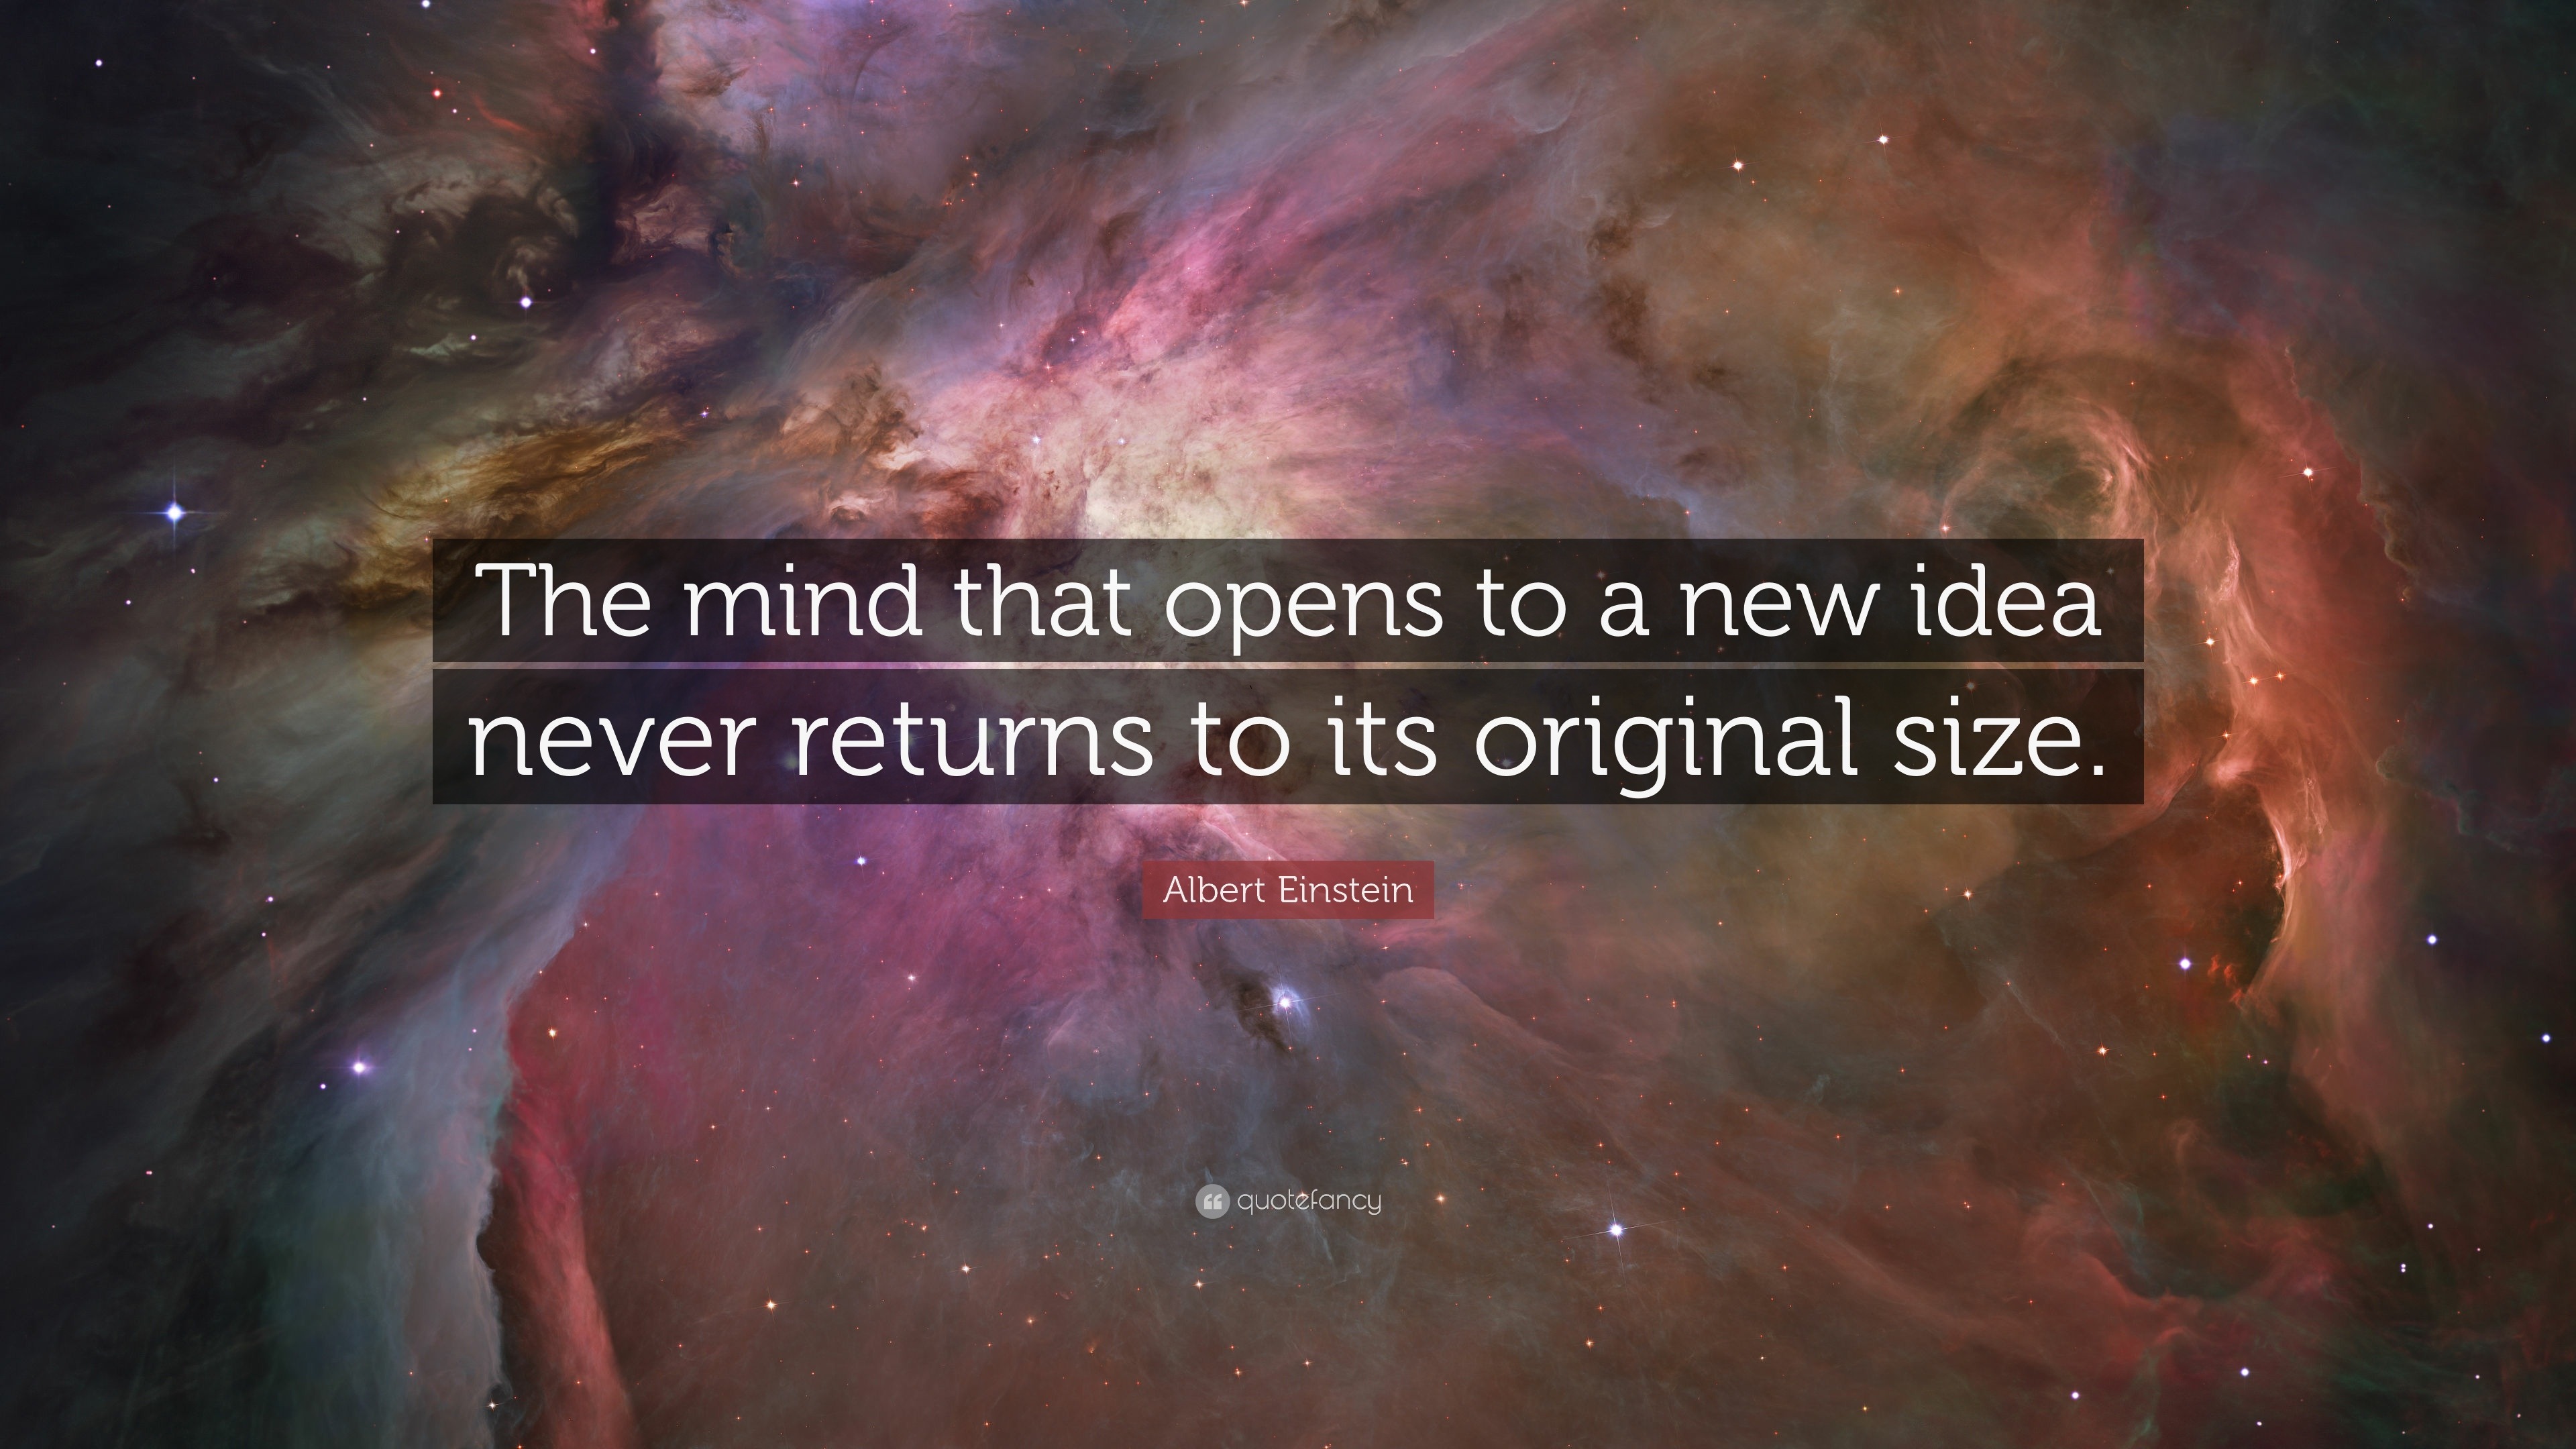 https://quotefancy.com/media/wallpaper/3840x2160/25354-Albert-Einstein-Quote-The-mind-that-opens-to-a-new-idea-never.jpg